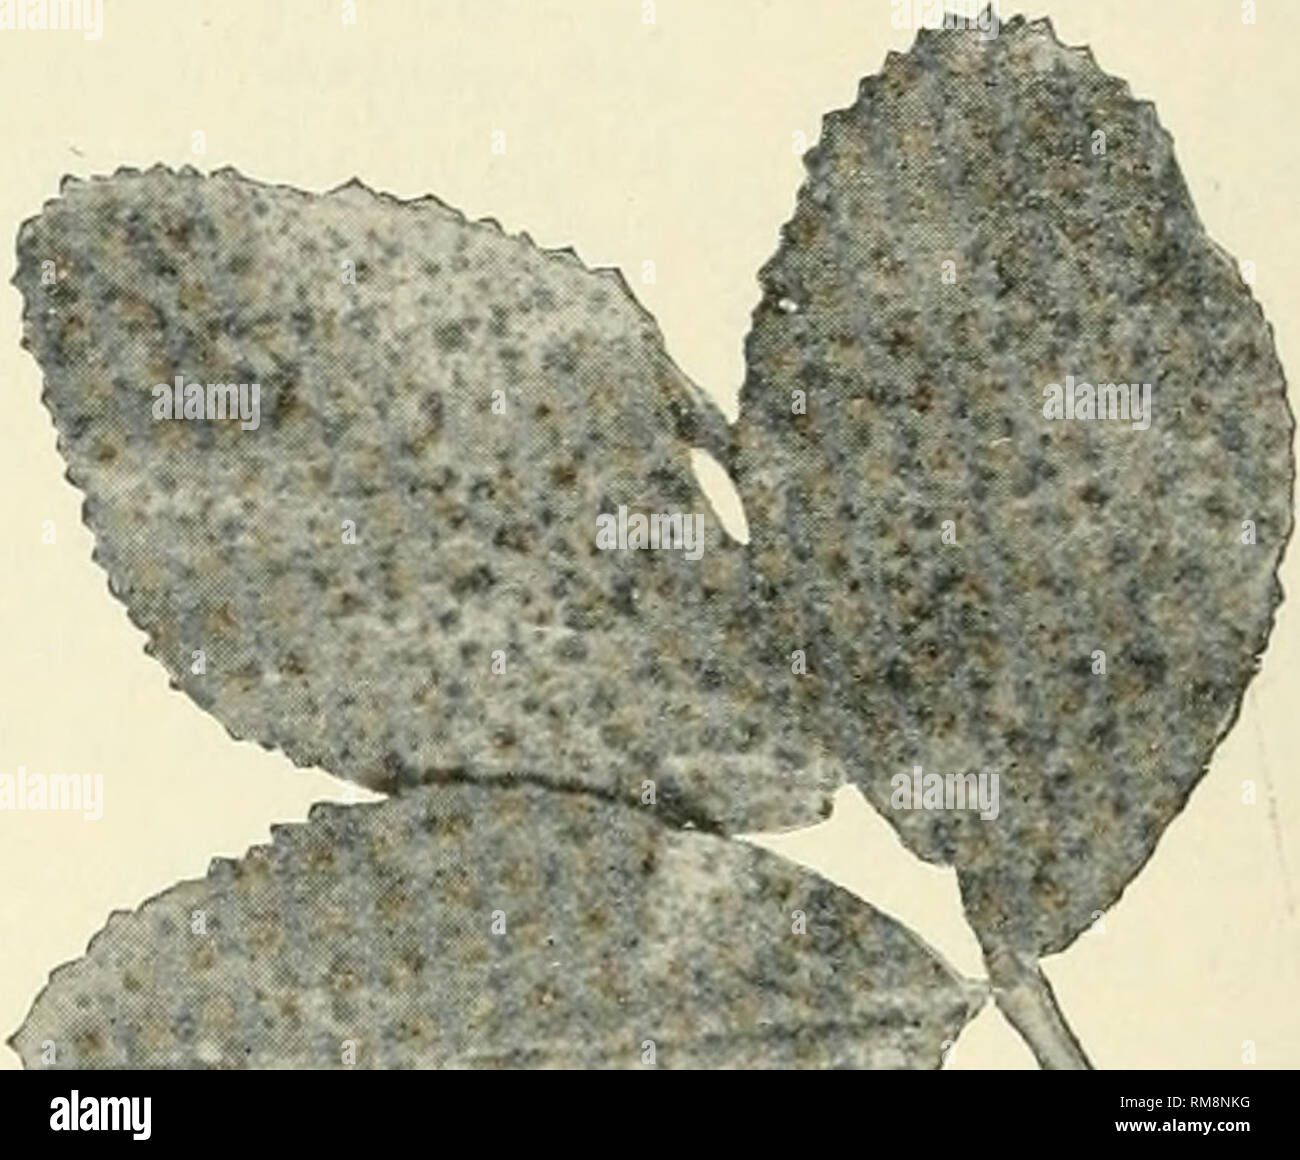 . Annual report of the Cornell University Agricultural Experiment Station, Ithaca, N.Y. Cornell University. Agricultural Experiment Station; Agriculture -- New York (State). 190 Bulletin 252. Scab.. Fig. 162. Alfalfa leaf-spot. APPLE. Commonly known among growers as &quot; the fungus.&quot; Usually most evident on the fruit. Spray with Bordeaux 5--5&quot;50 o^ 3-3-50; first, just before the blossoms open; second, just as the blossoms fall; third, 10 to 14 days after the hlossoms fall. The second spraying seems to be the most important. Spray thoroughly. For the use of insect poisons with Borde Stock Photo